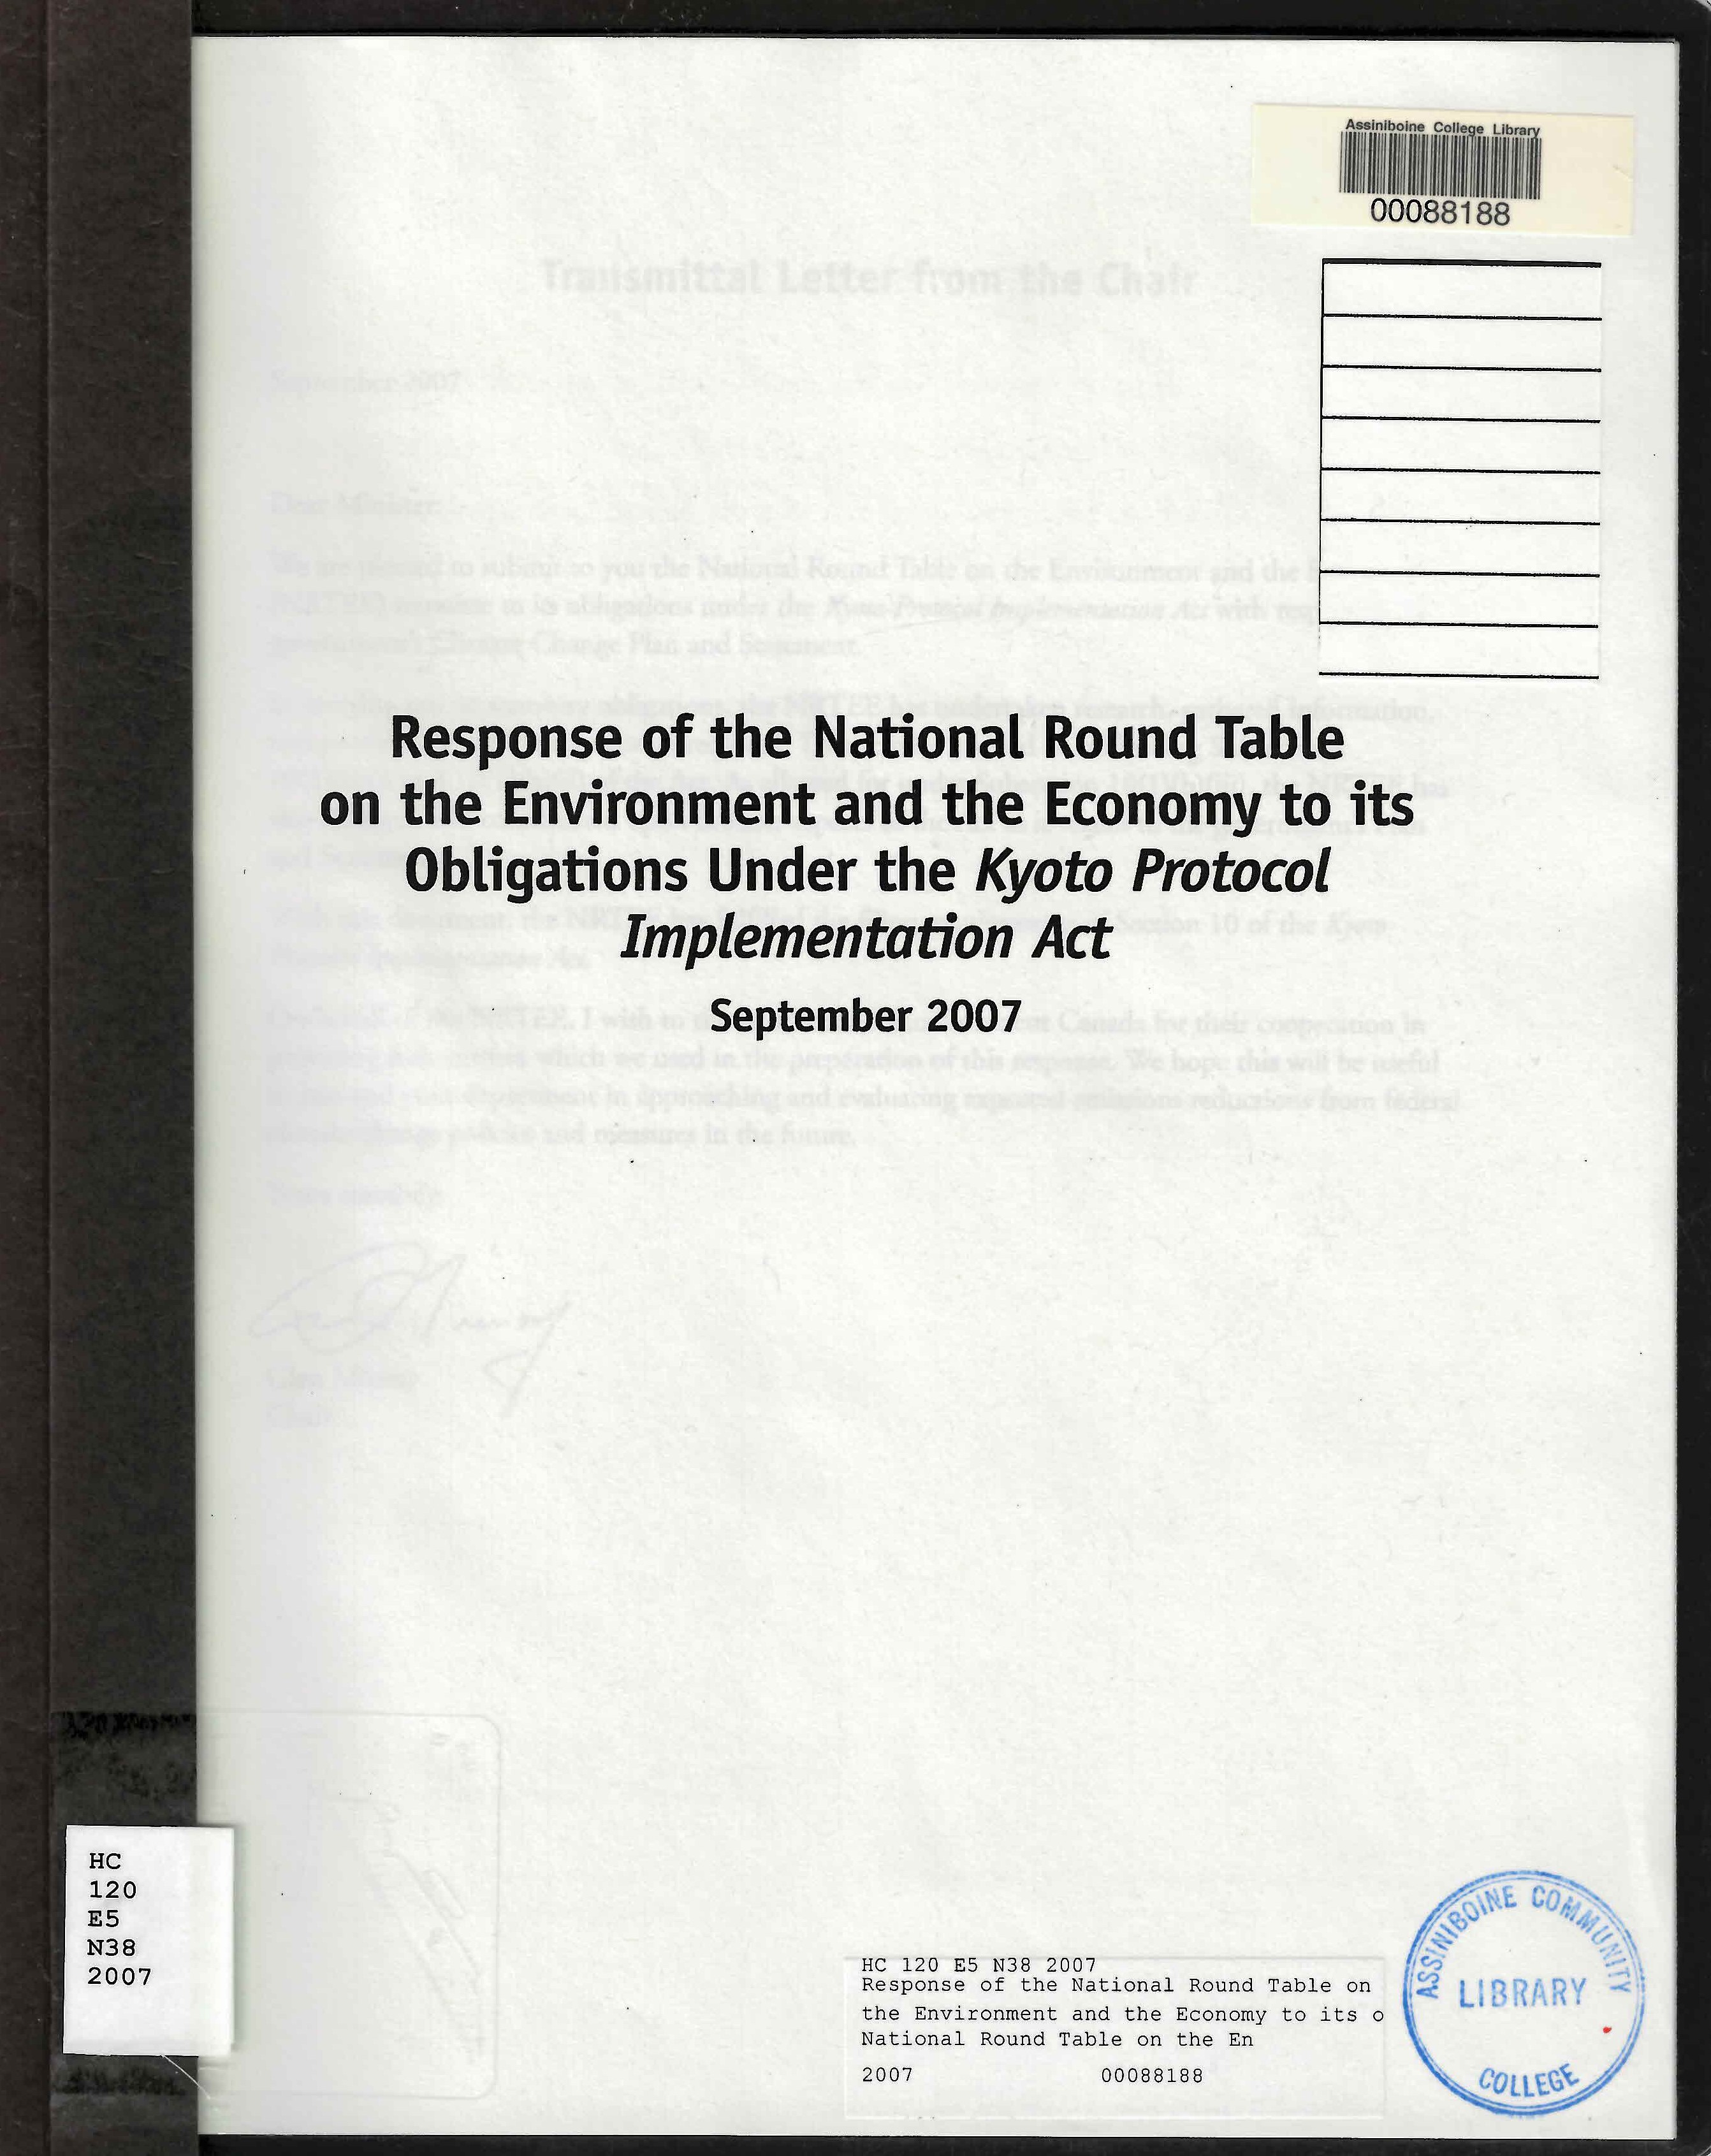 Response of the National Round Table on the Environment and the Economy to its obligations under the Kyoto Protocol Implementation Act